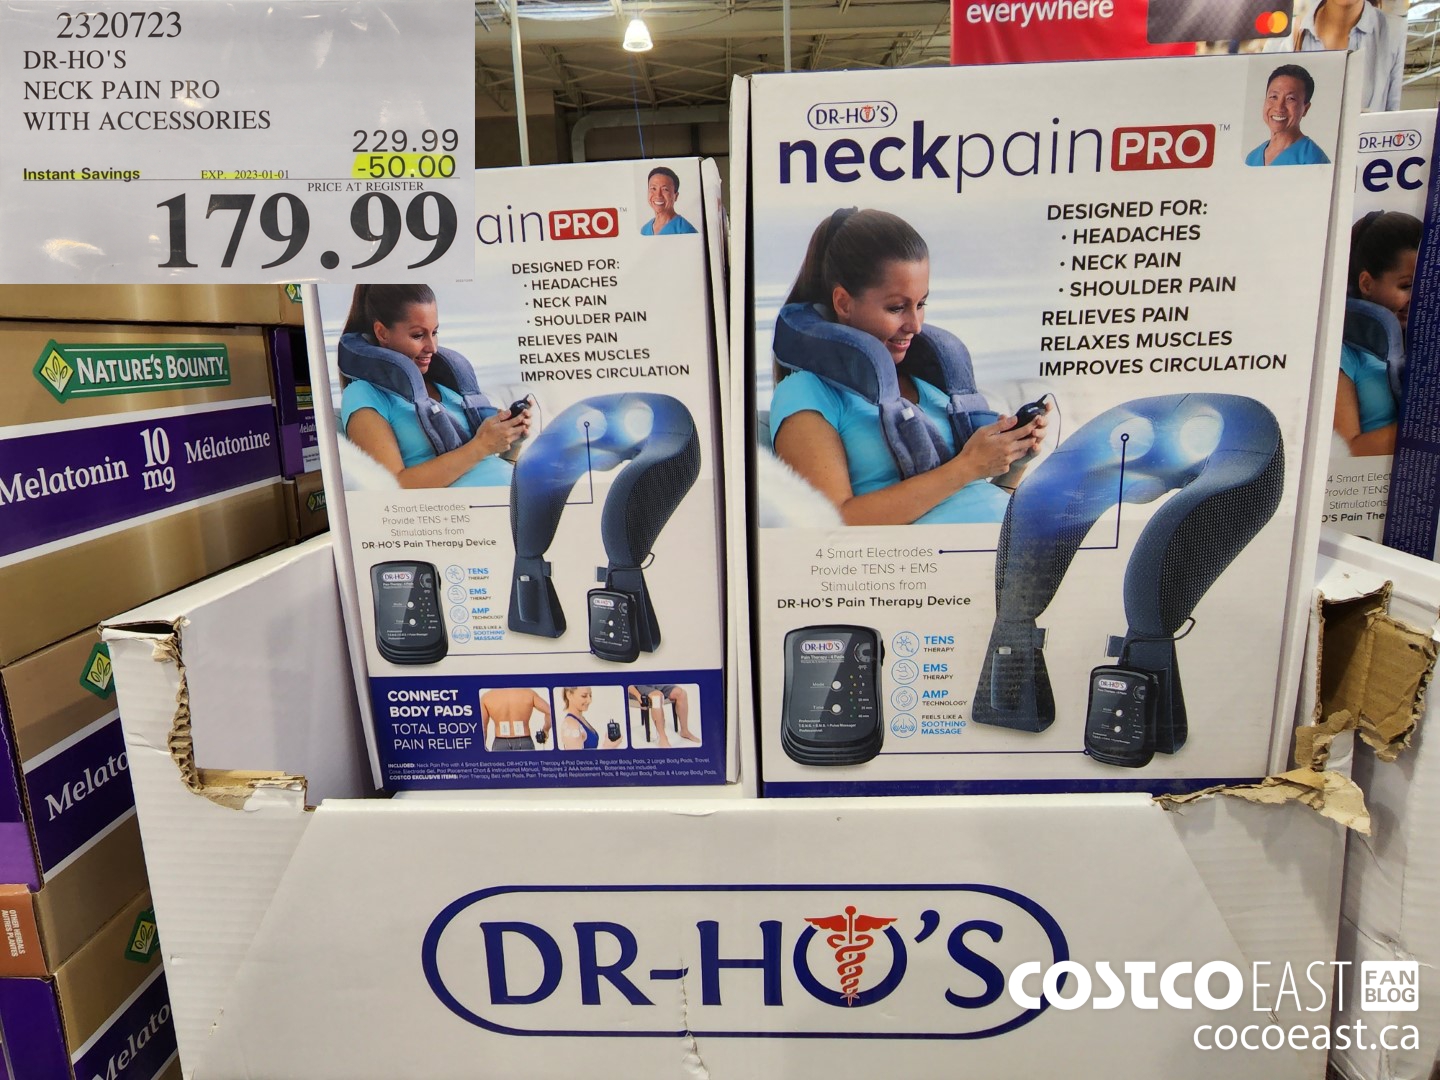 2520723 DR HO S NECK PAIN PRO WITH ACCESSORIES 50 00 INSTANT